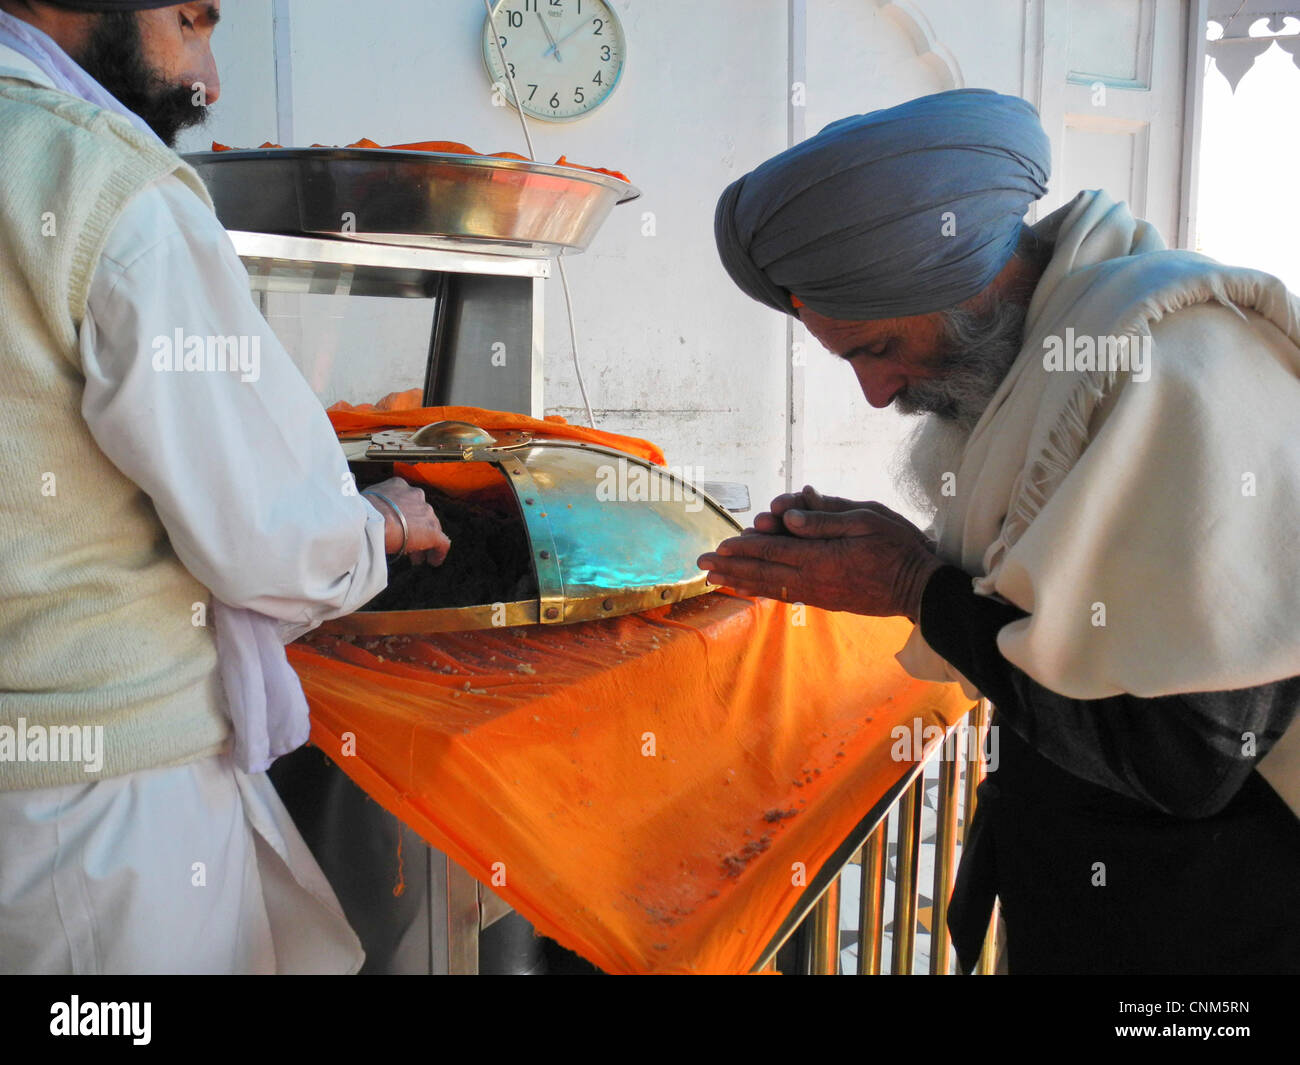 India Punjab Amritsar Golden Temple or Hari Mandir Inside the temple a pilgrim receives the soft and sweet prasad or food supply Stock Photo